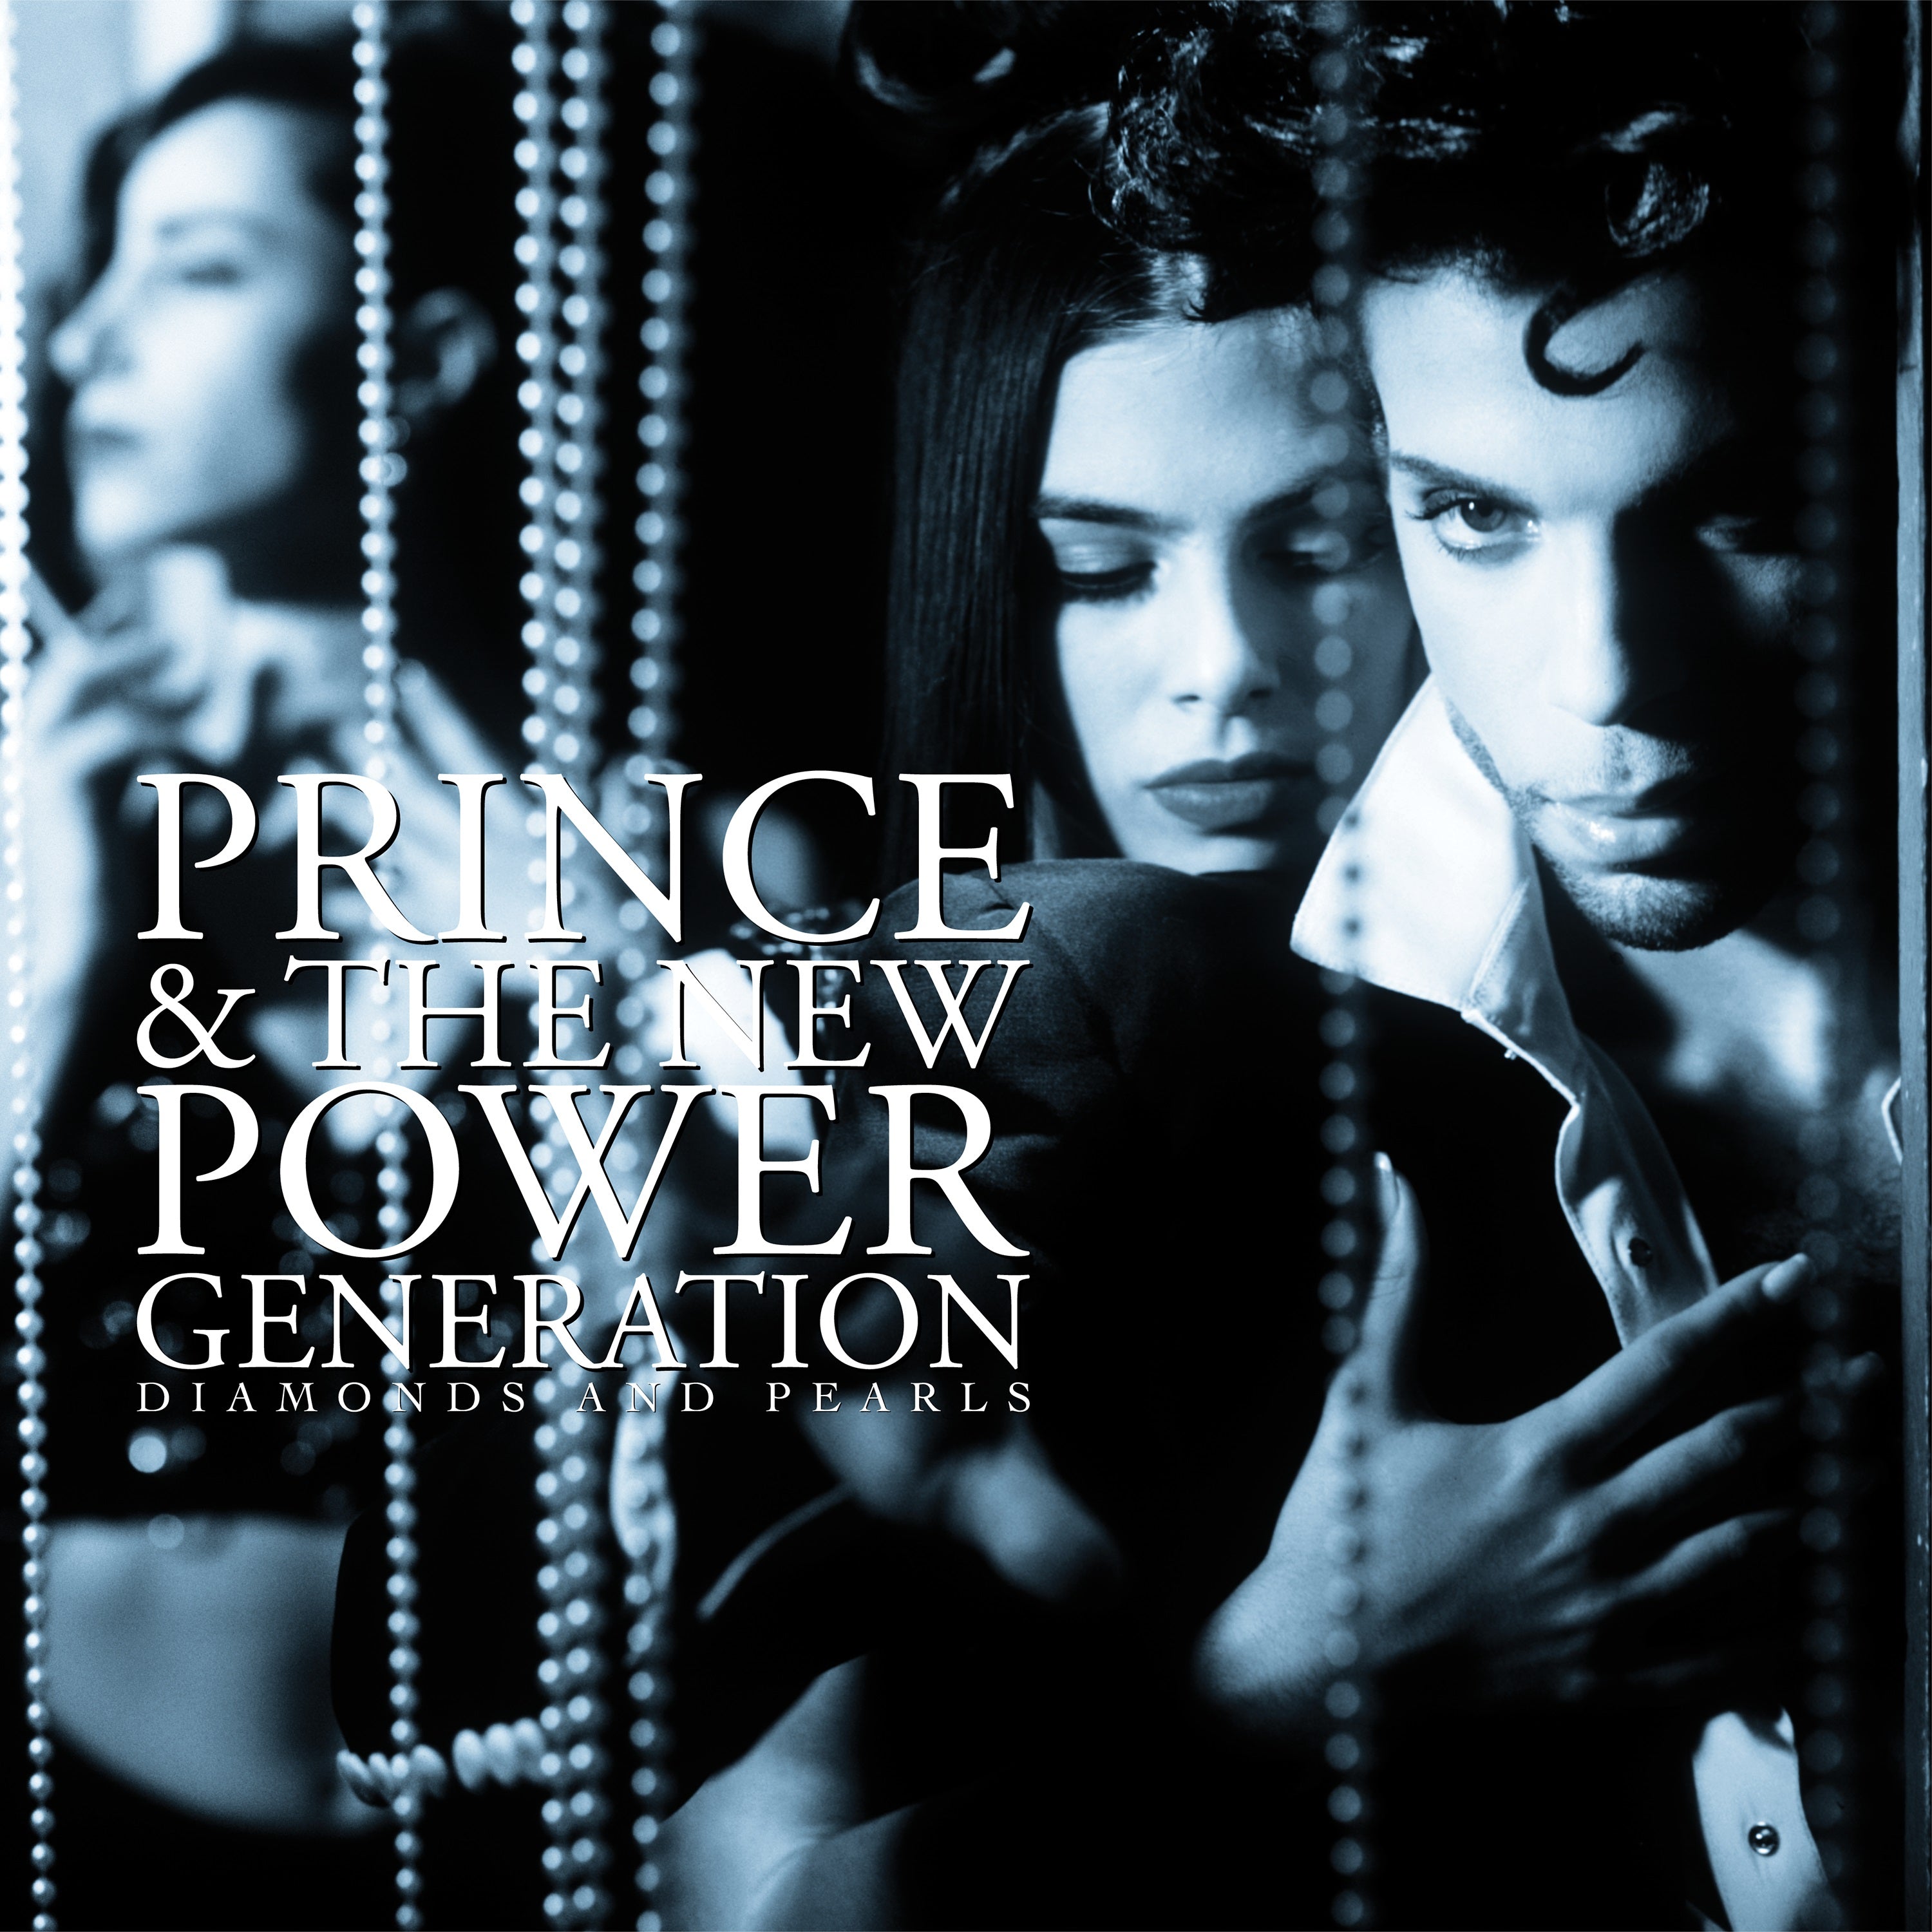 Prince & The New Power Generation | Diamonds and Pearls Super Deluxe Edition | Vinyl - 0